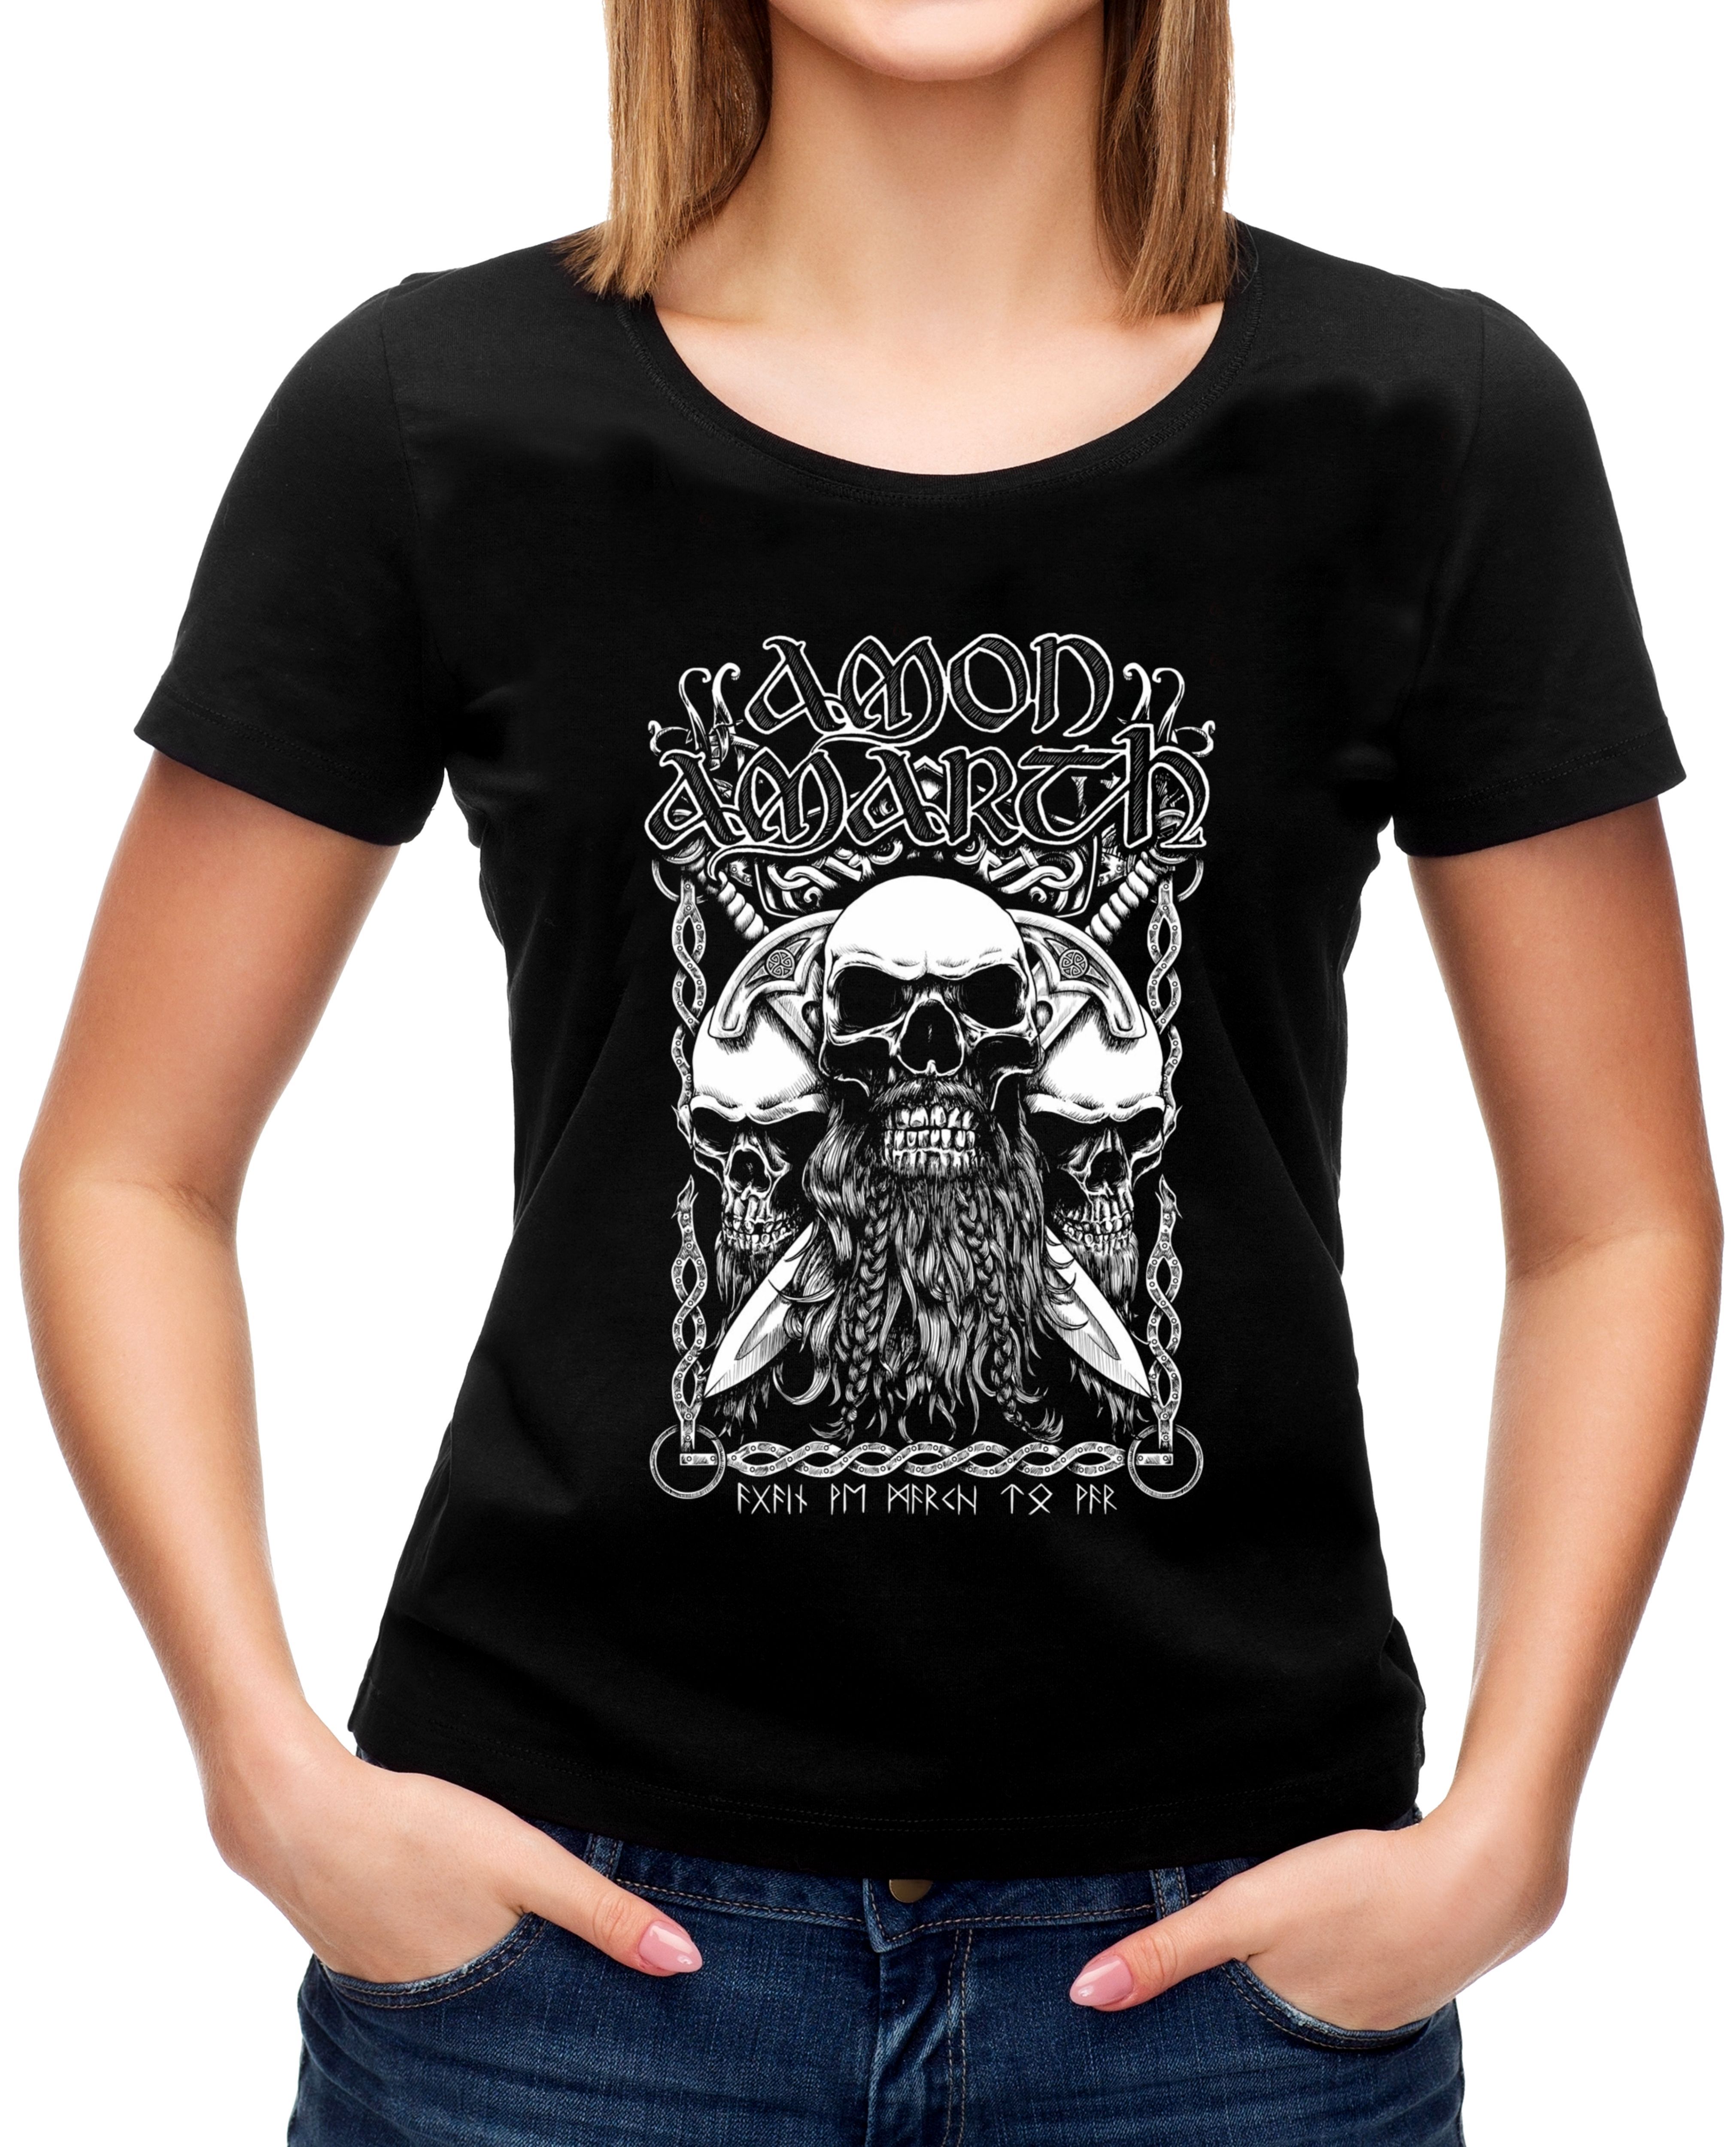 Amon Amarth Skull Girlie T-Shirt – Metal & Rock T-shirts and Accessories